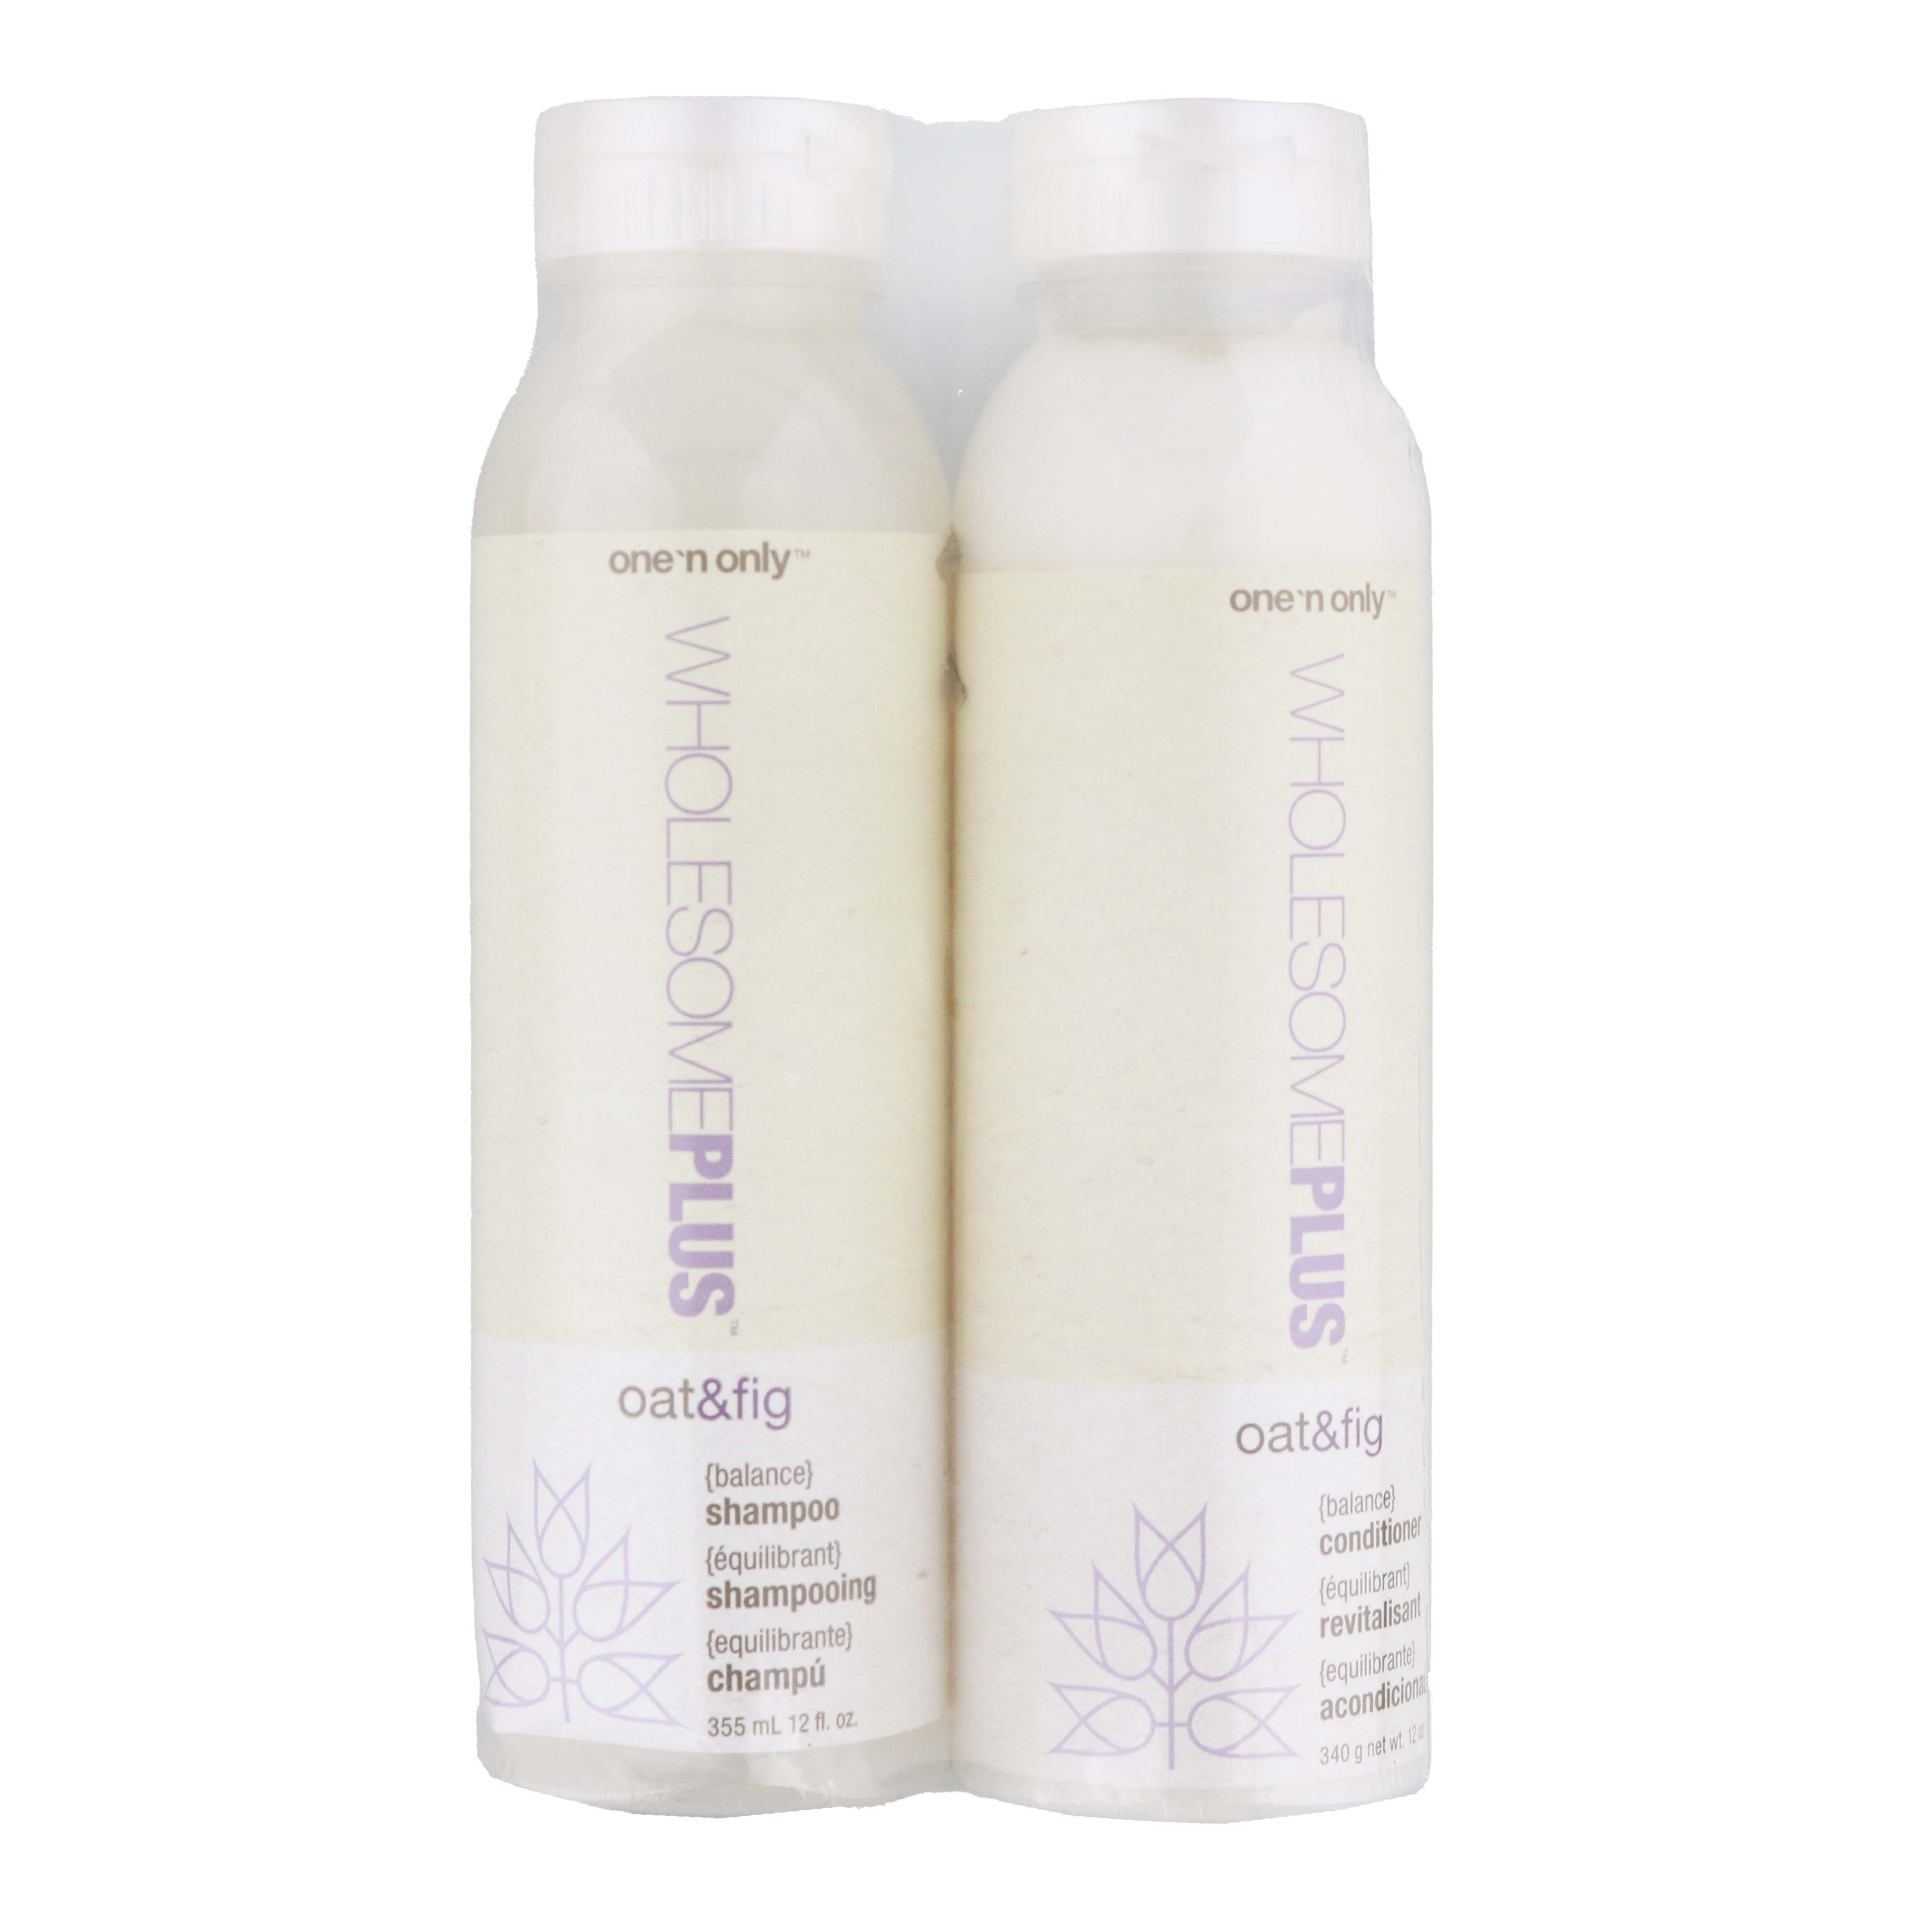 One 'n Only Oat and Fig Shampoo Conditioner Duo - Shop Shampoo & Conditioner at H-E-B